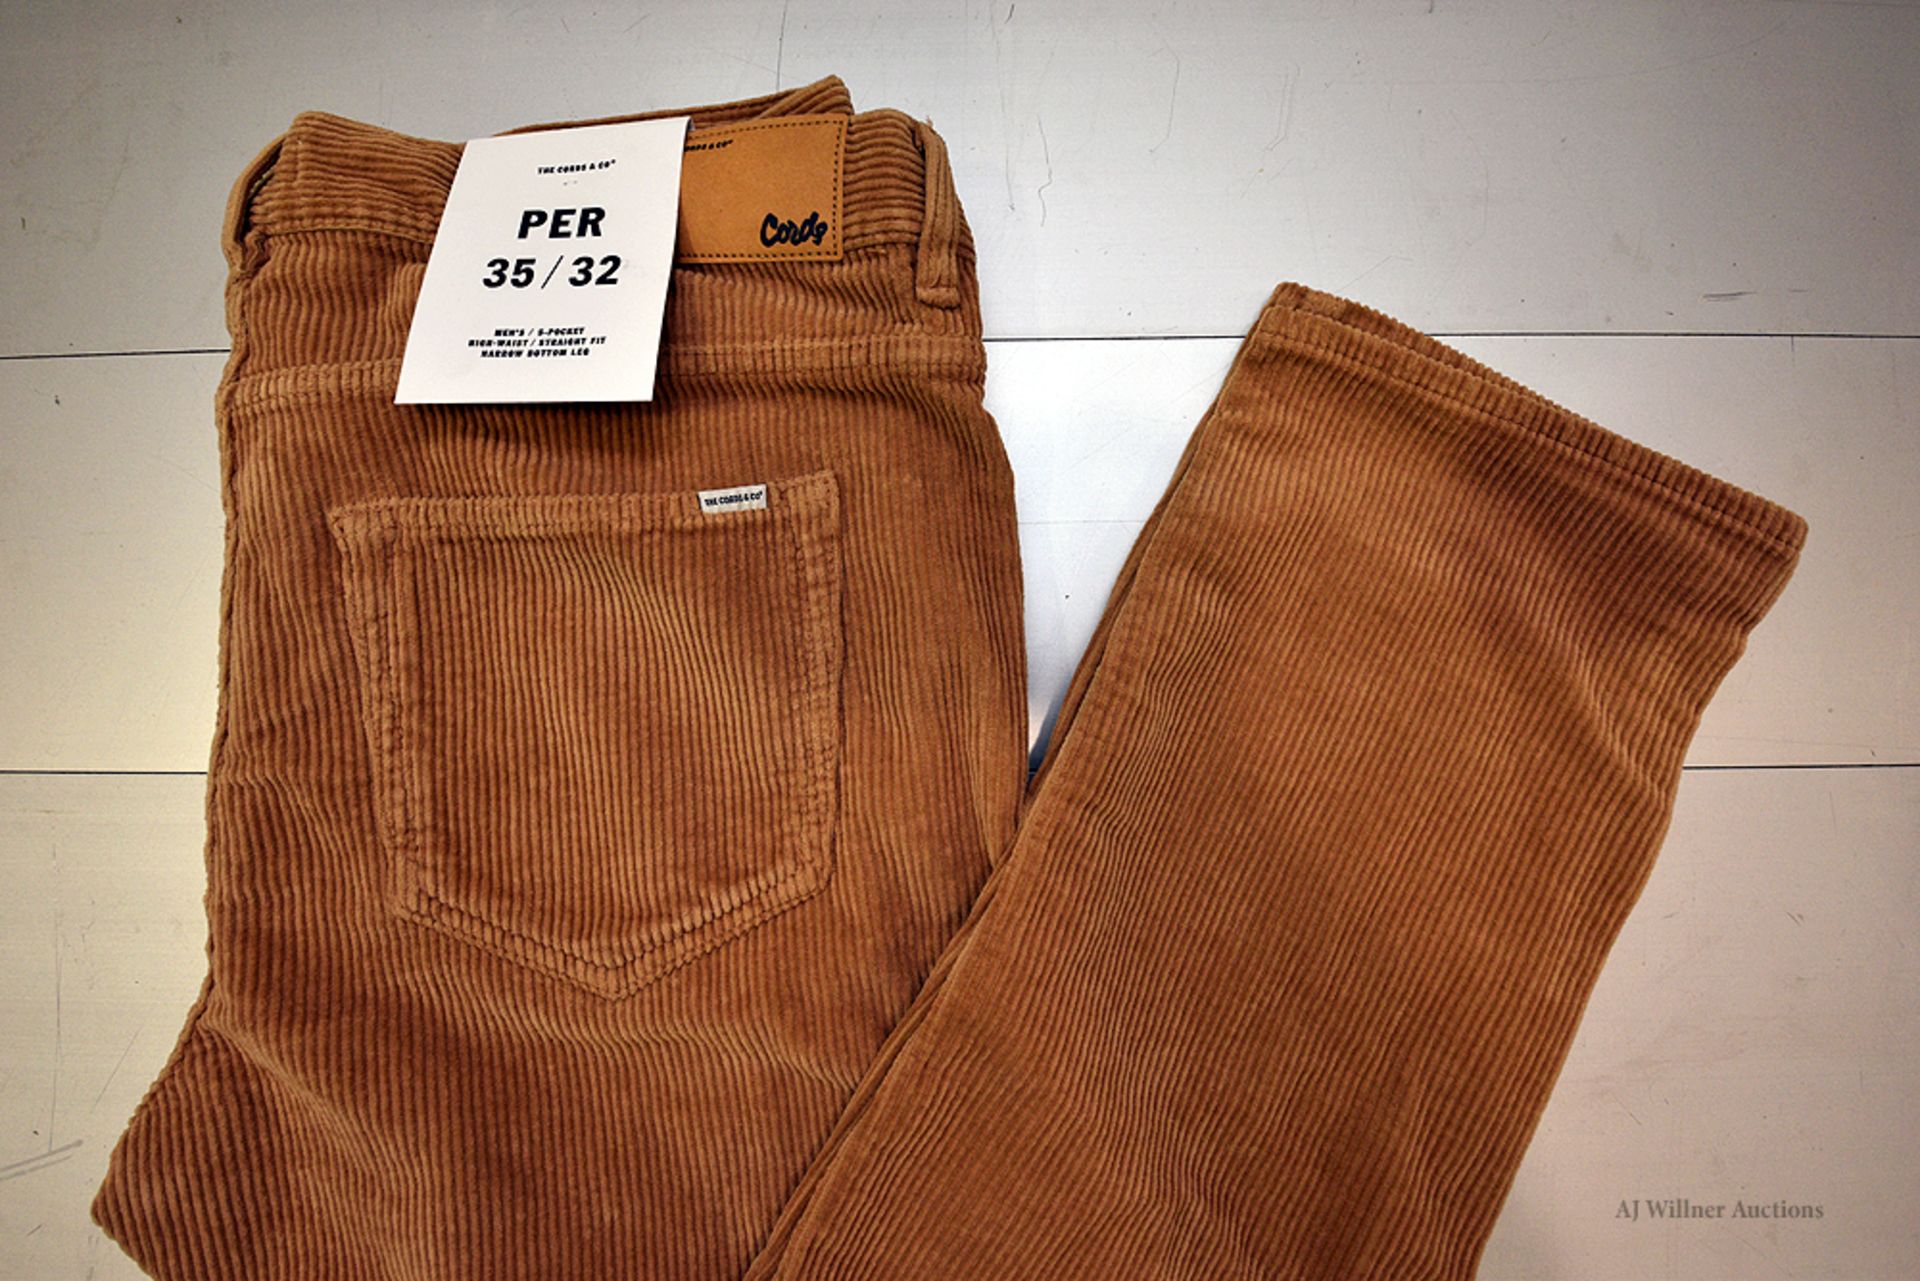 The Cords & Co. "Per" Style, Men's/5-Pocket/High-Waist/ Straight Fit/ Narrow Bottom Leg - Image 2 of 5